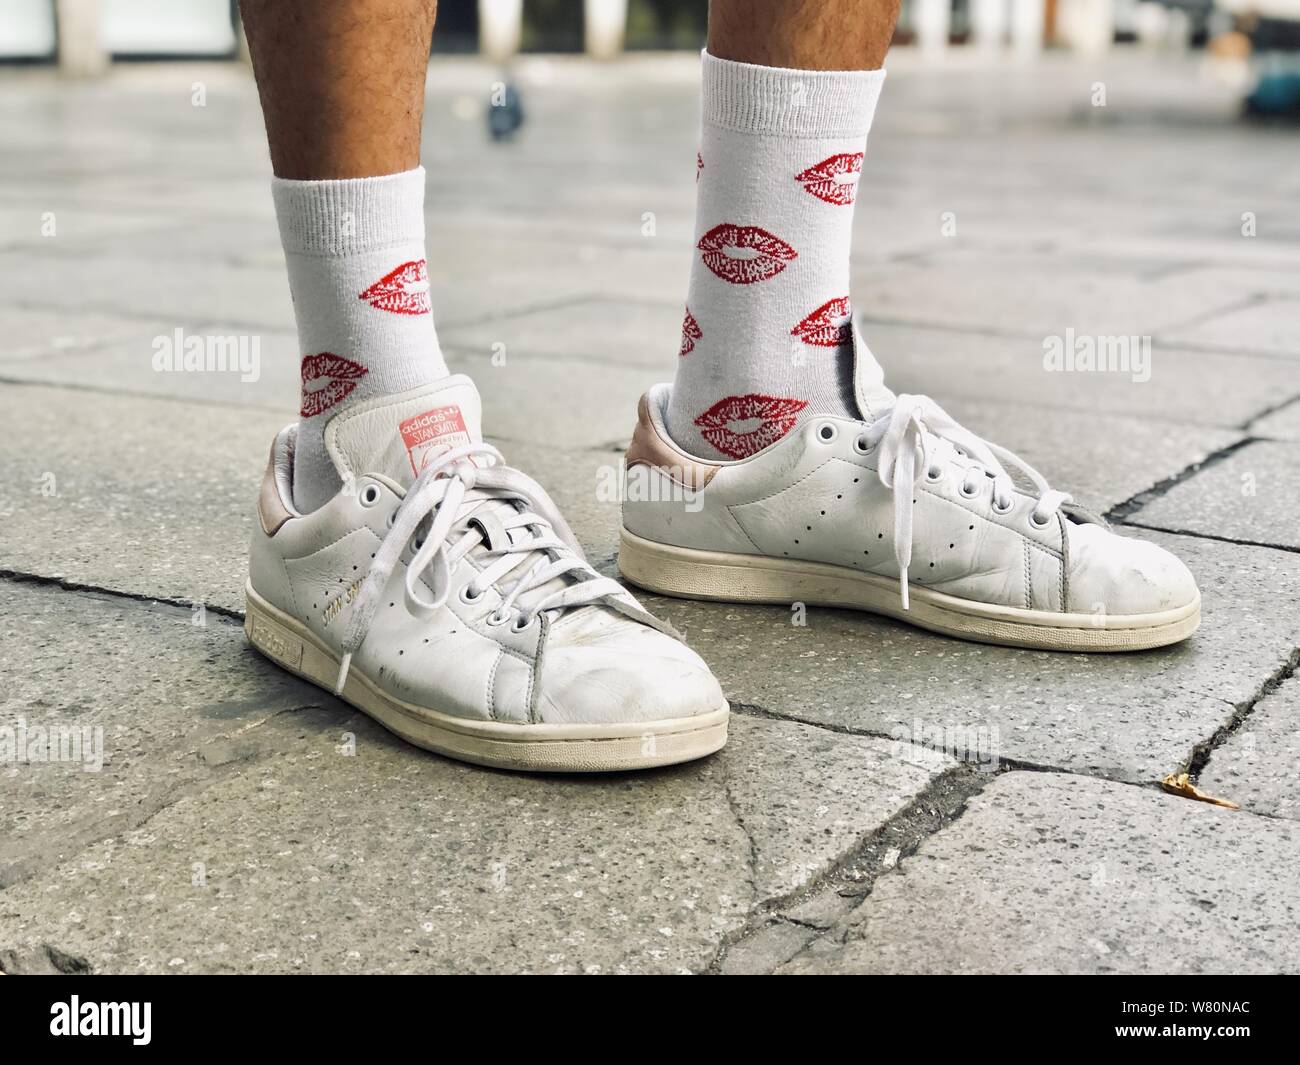 socks with white shoes